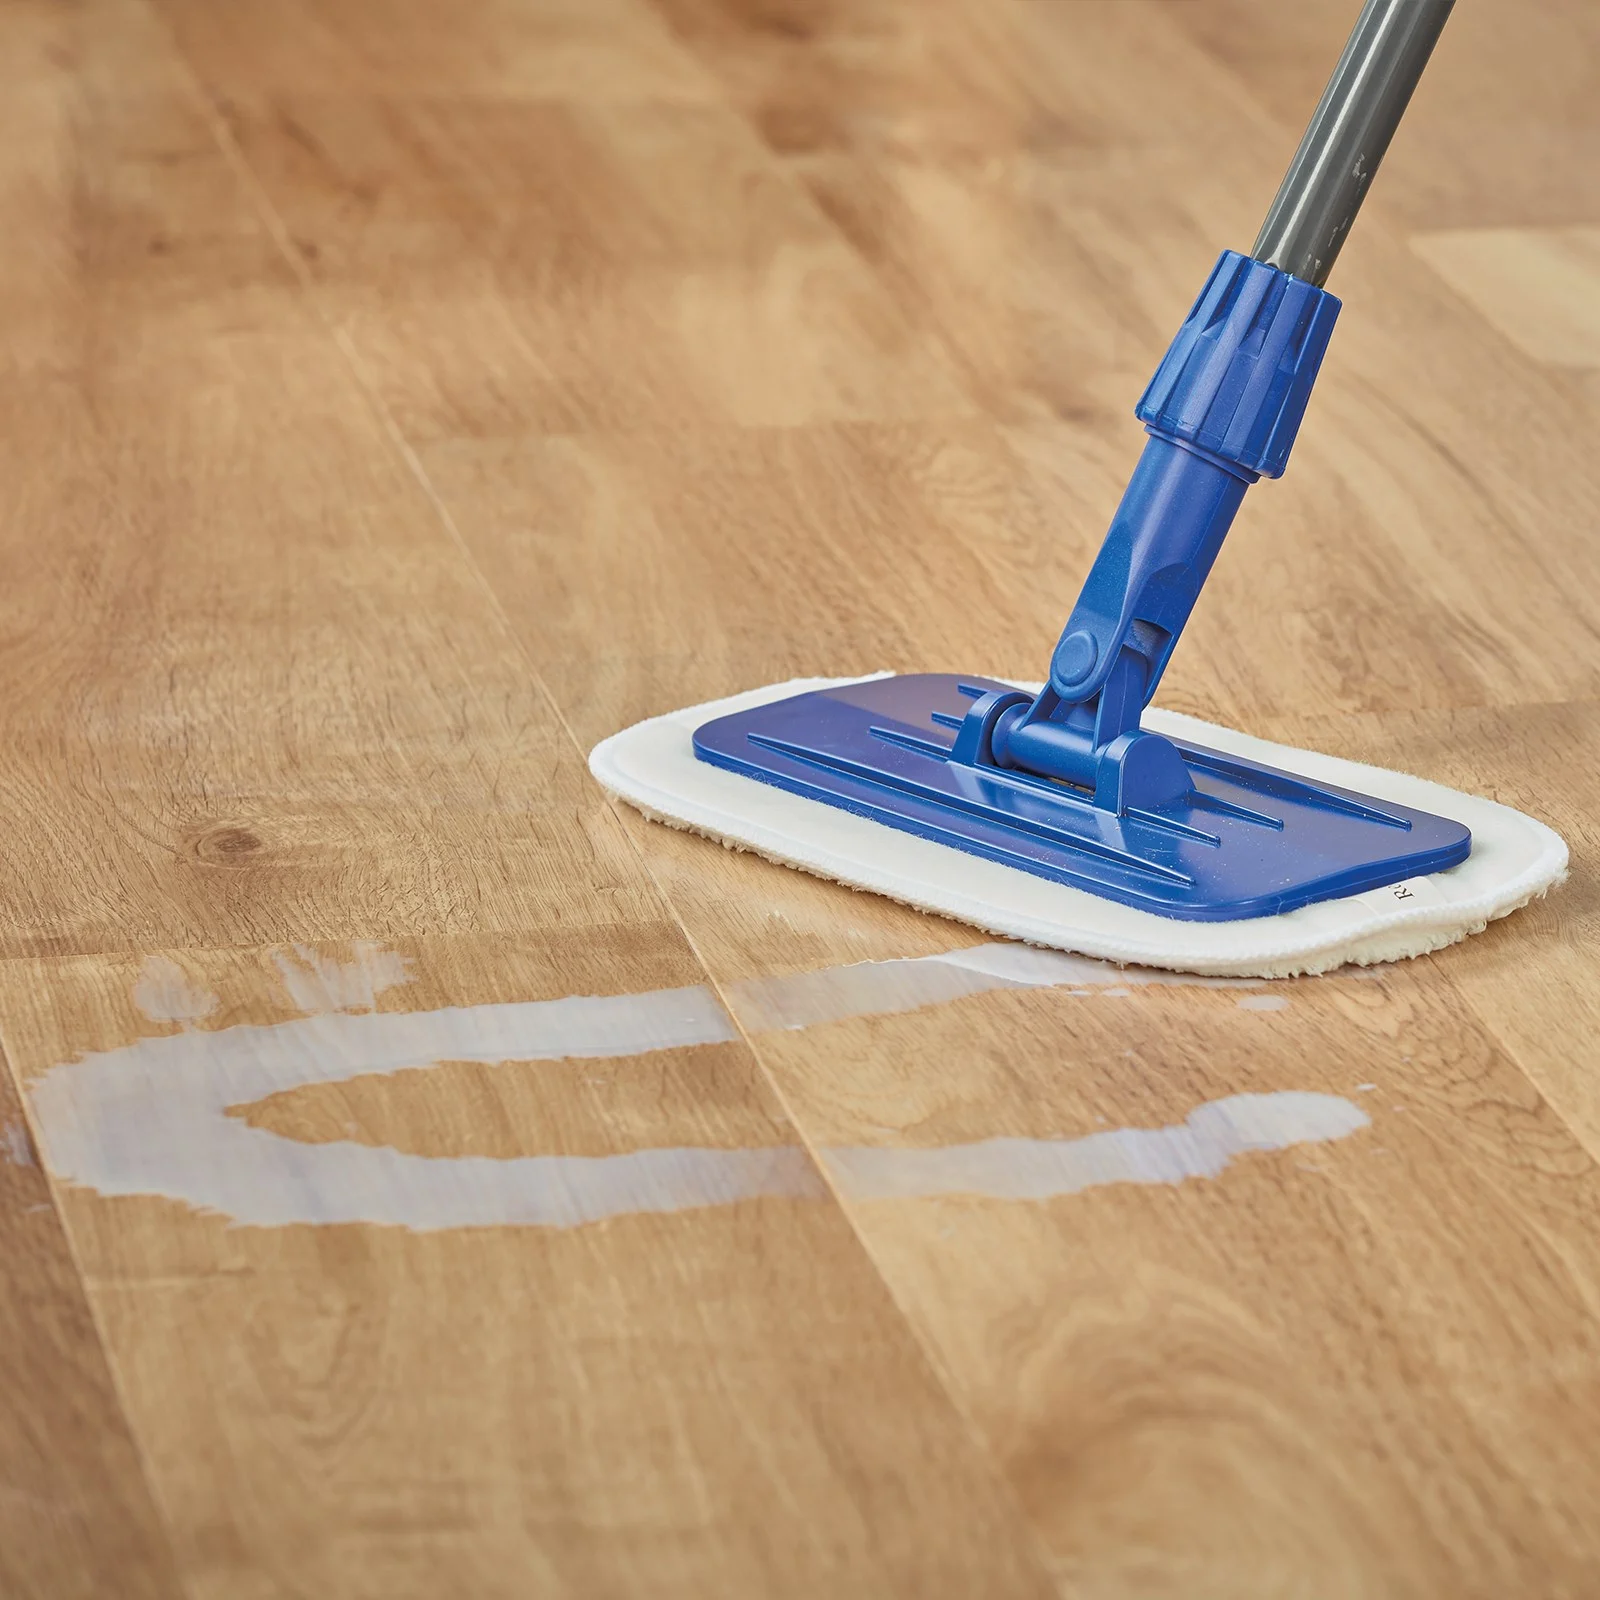 How to Clean LVT Flooring